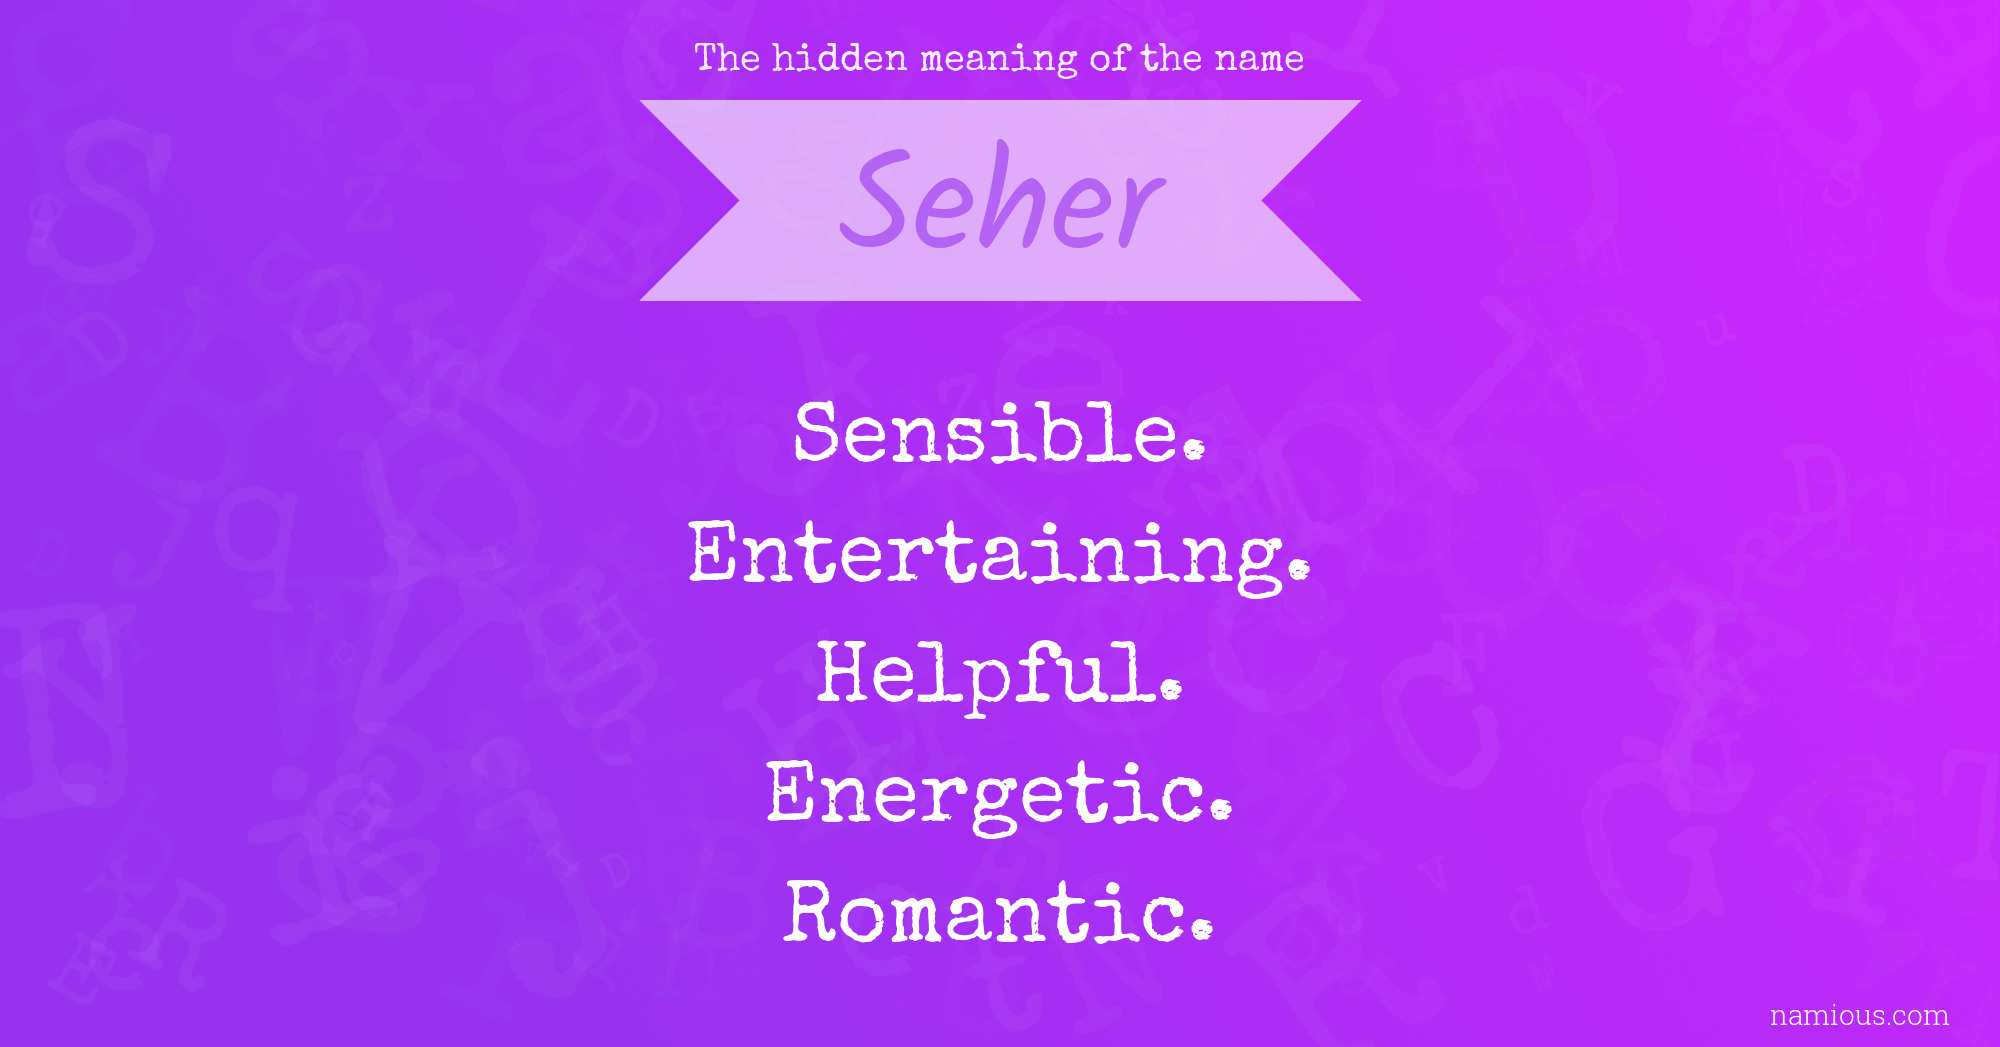 The hidden meaning of the name Seher